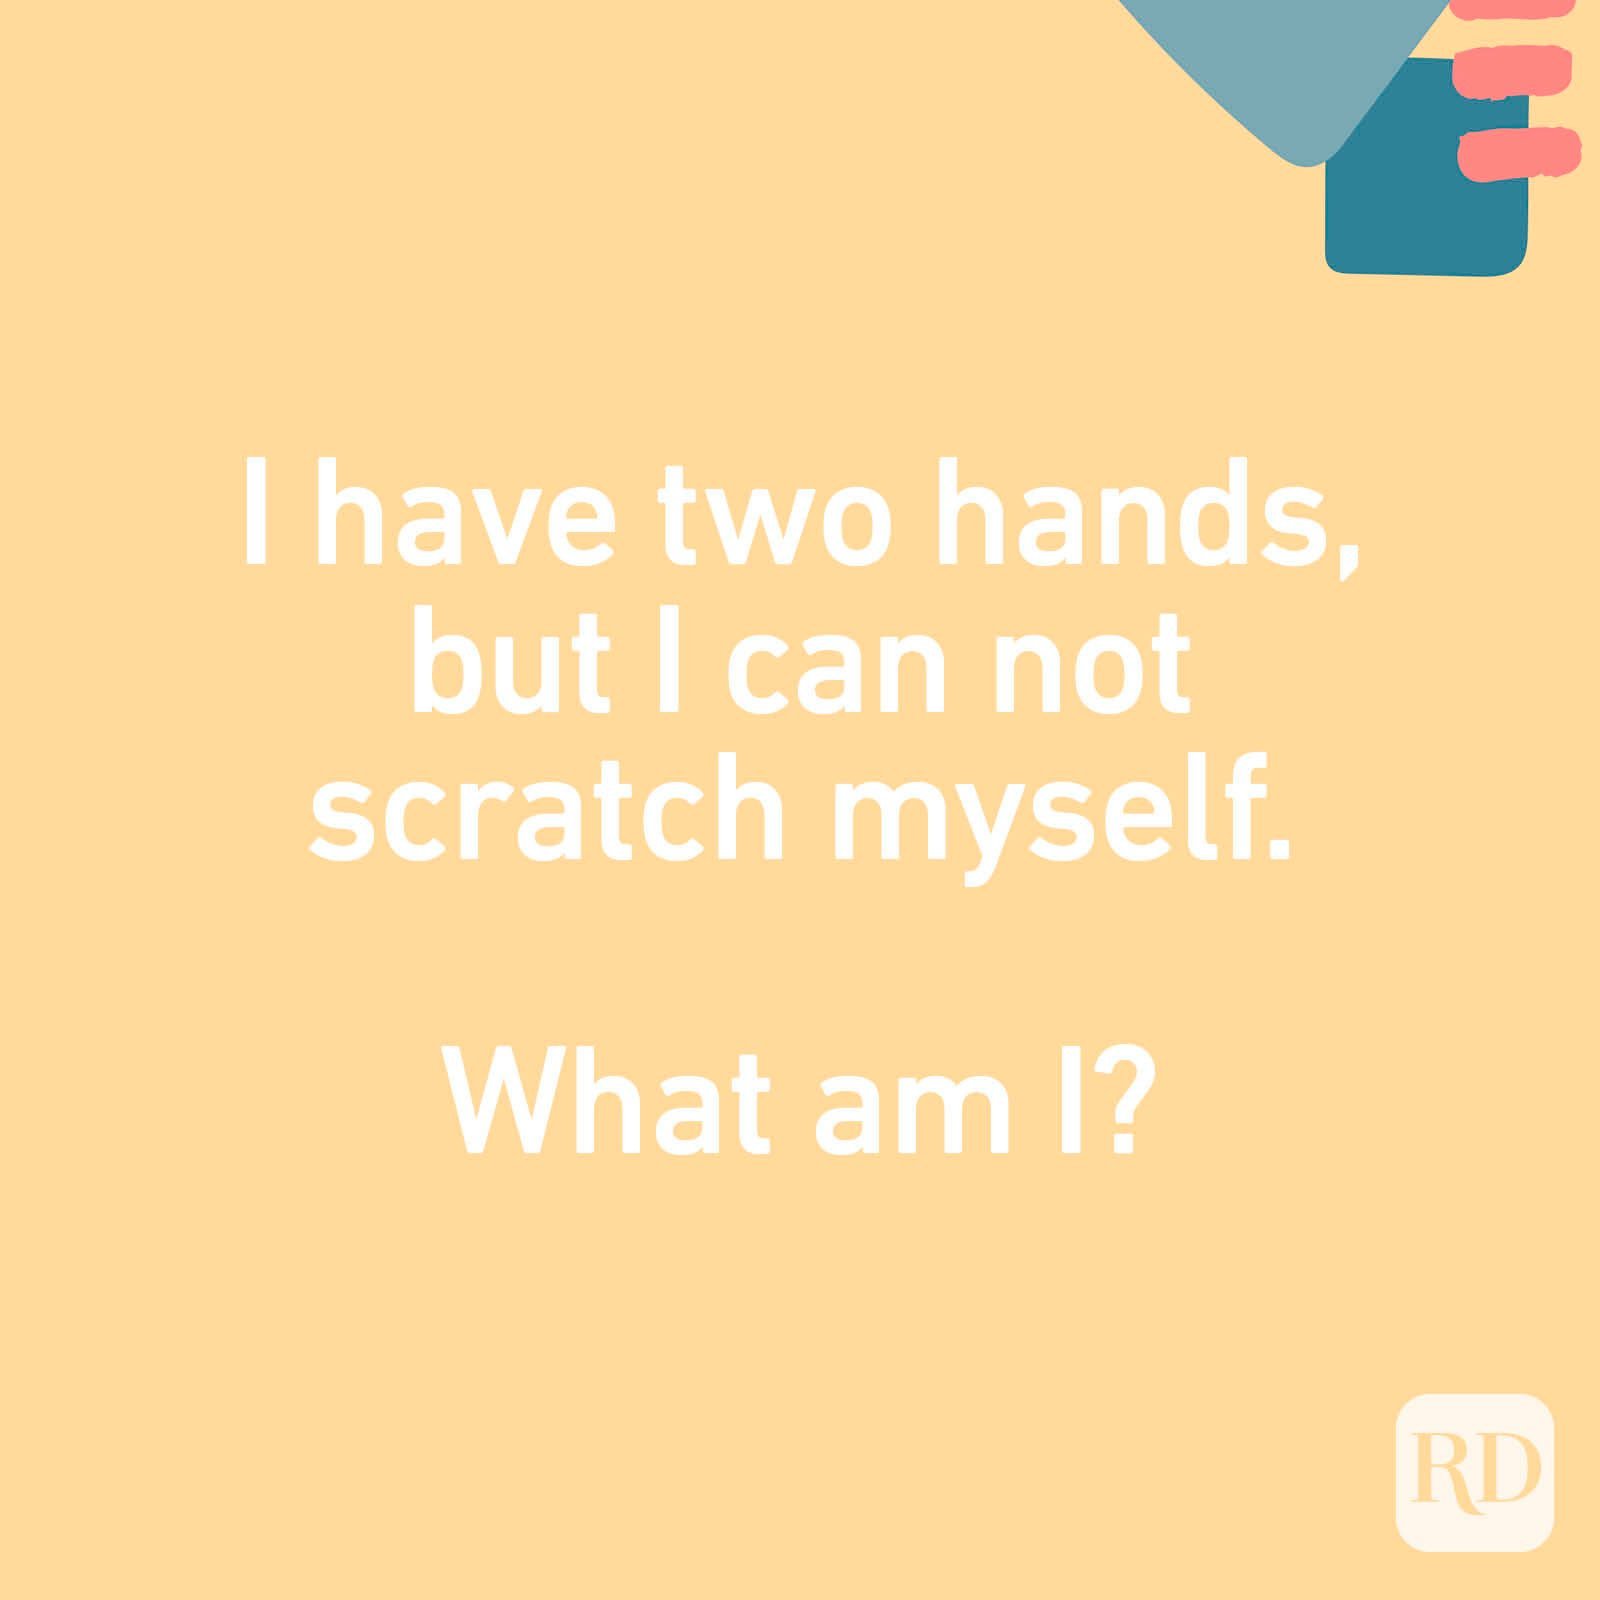 I have two hands, but I can not scratch myself. What am I?